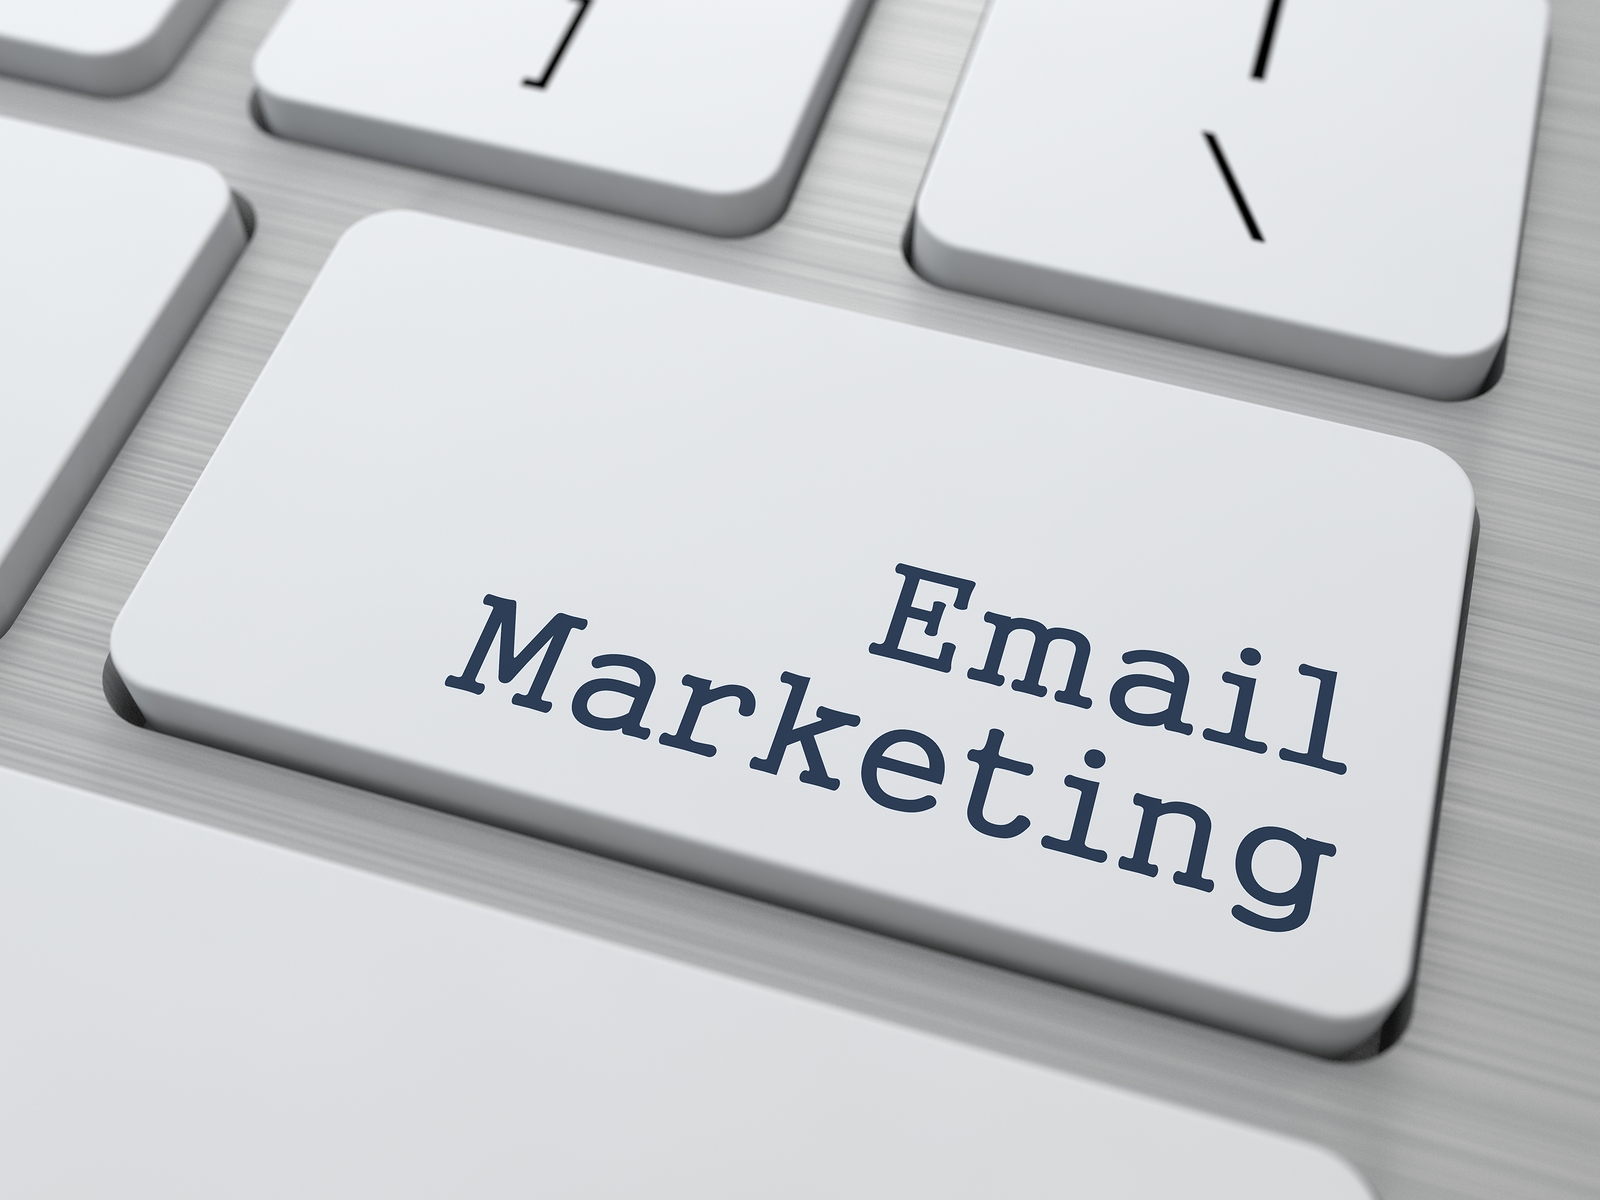 title email marketing